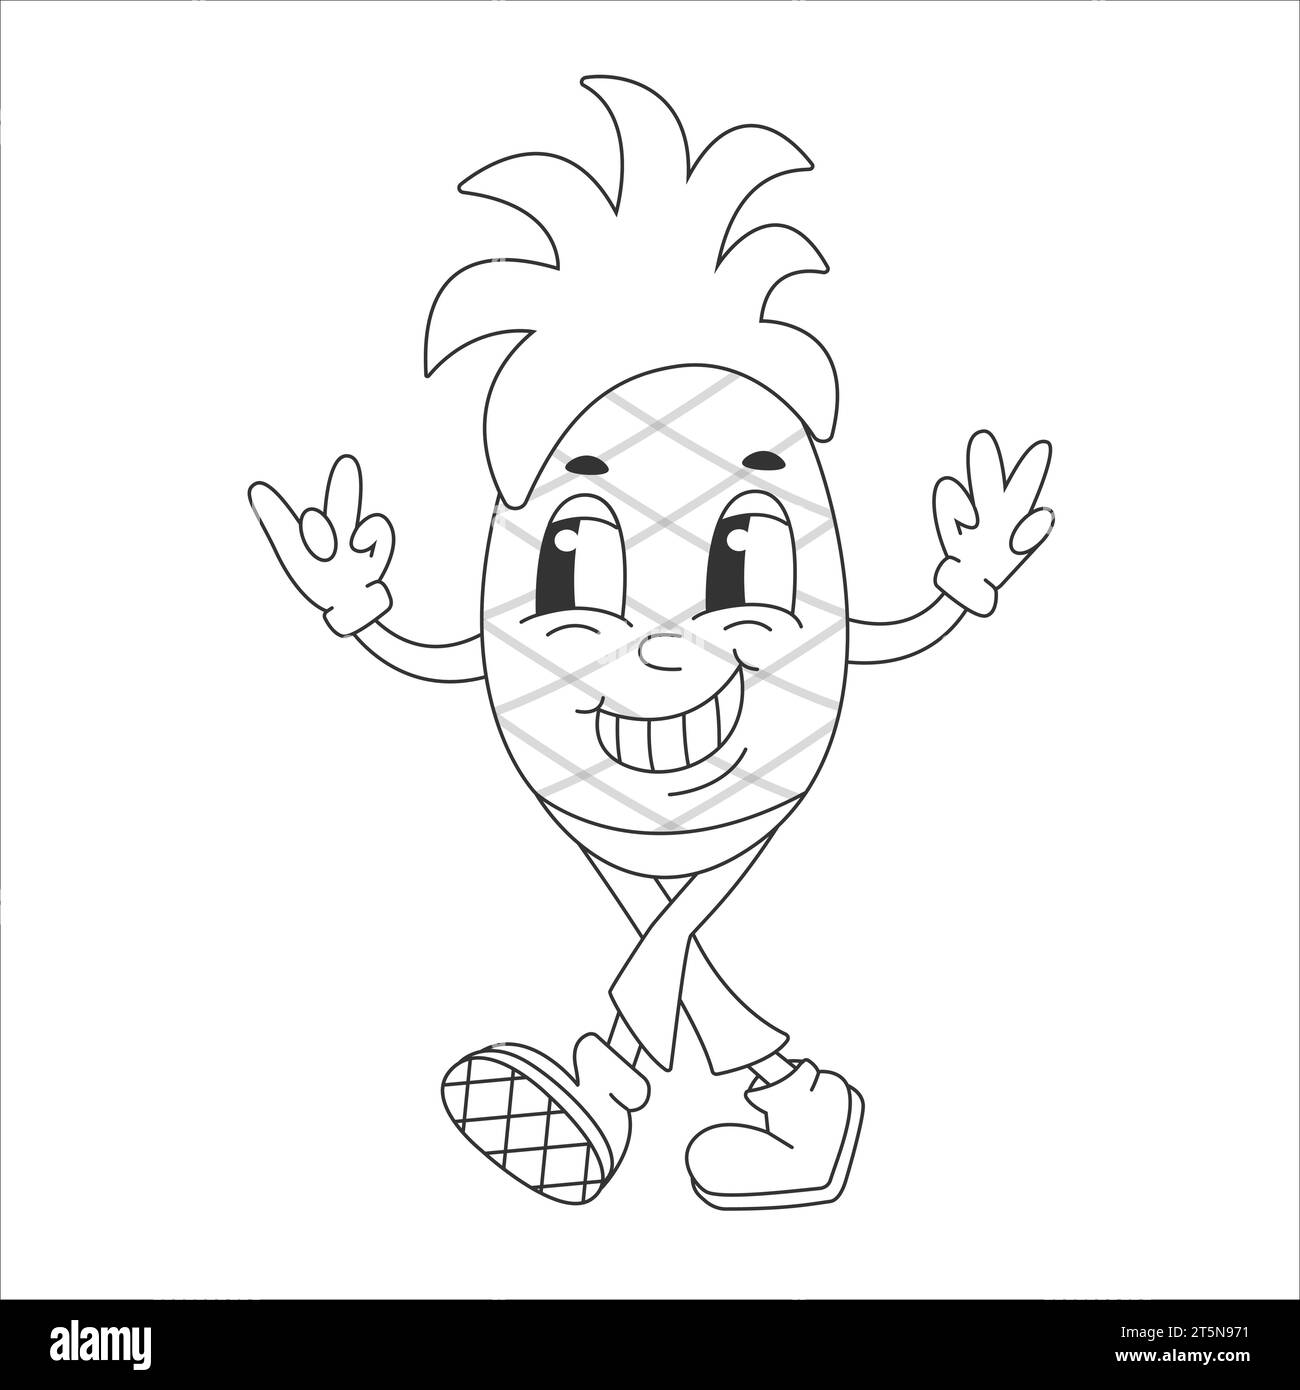 Coloring page with Fruit Funny Retro Groovy Cartoon Hippie Character. Comic Pineapple Character on white background. Groovy Summer Vector Illustration Stock Vector